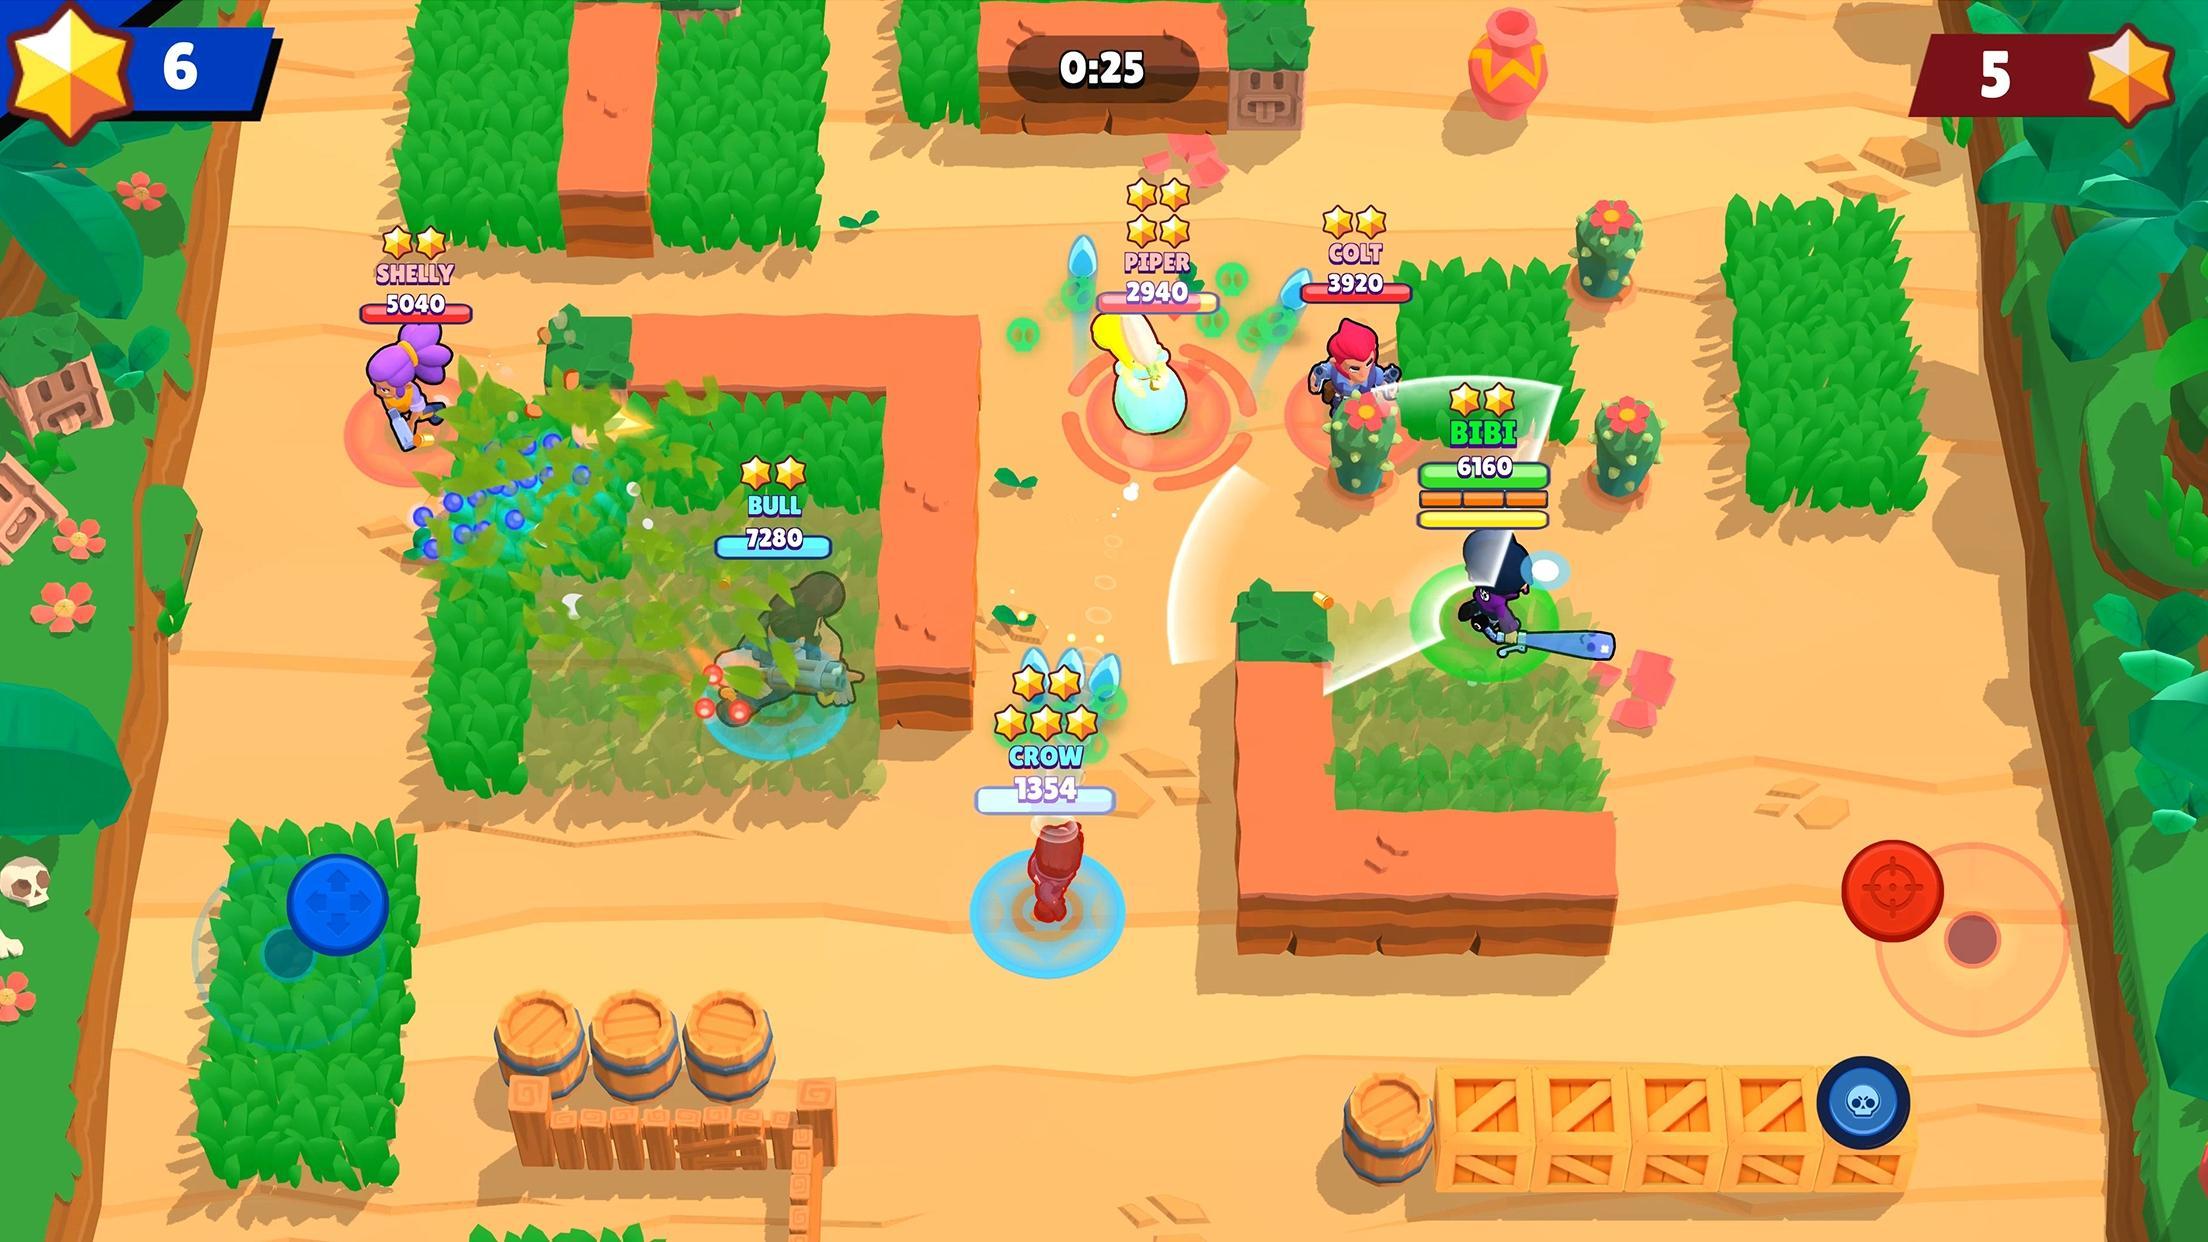 Brawl Stars Apk Download Pick Up Your Hero Characters In 3v3 Smash And Grab Mode Brock Shelly Jessie And Barley - brawl stars gioco da scaricare